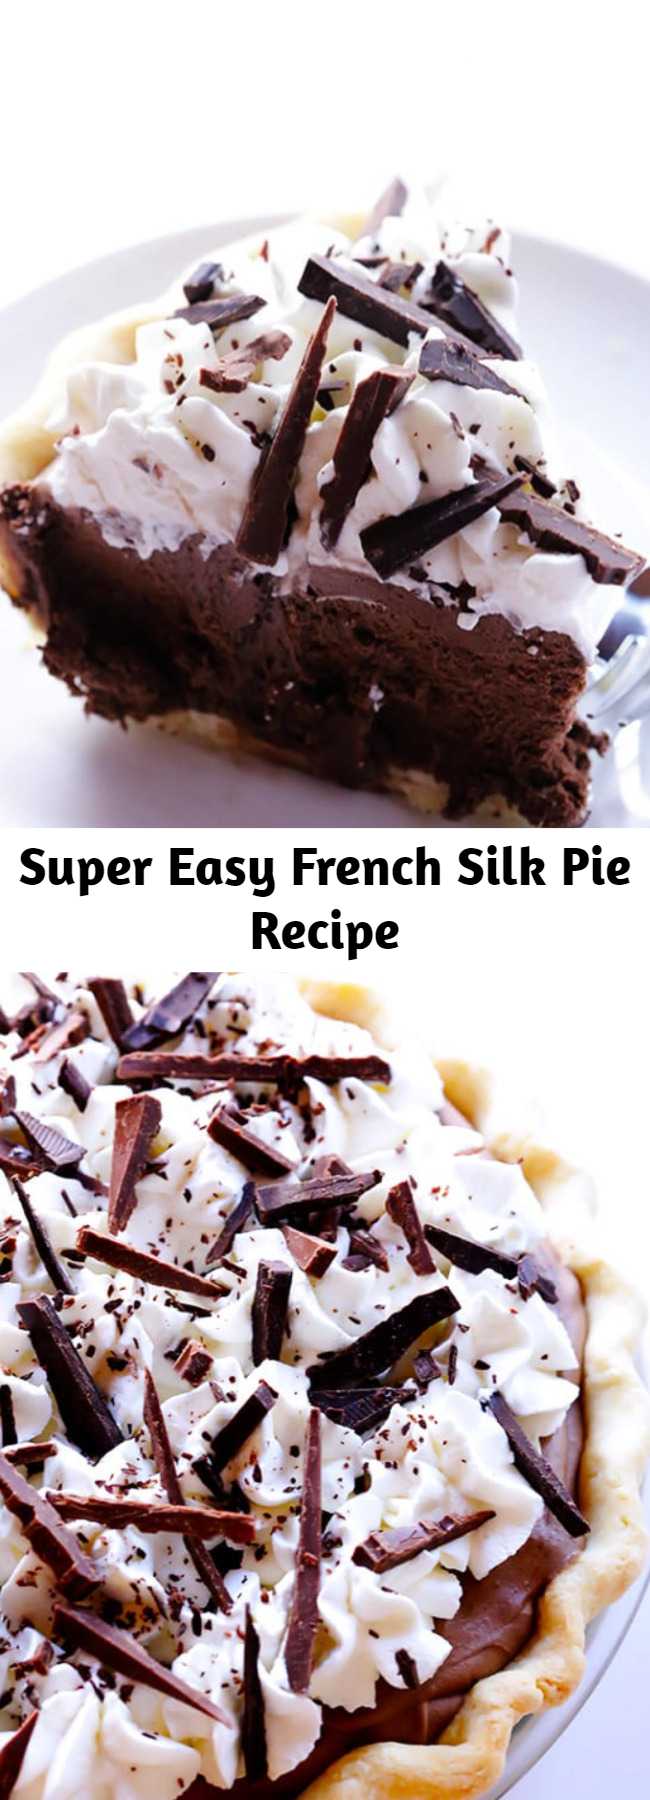 Super Easy French Silk Pie Recipe - If you love chocolate pie, you are going to love this French Silk Pie recipe! Some of you probably know it simply as Chocolate Pie. But whatever you call it, this French Silk Chocolate Pie is decadent, creamy, silky, and a definite crowd-pleaser. And it is filled with chocolate!!!